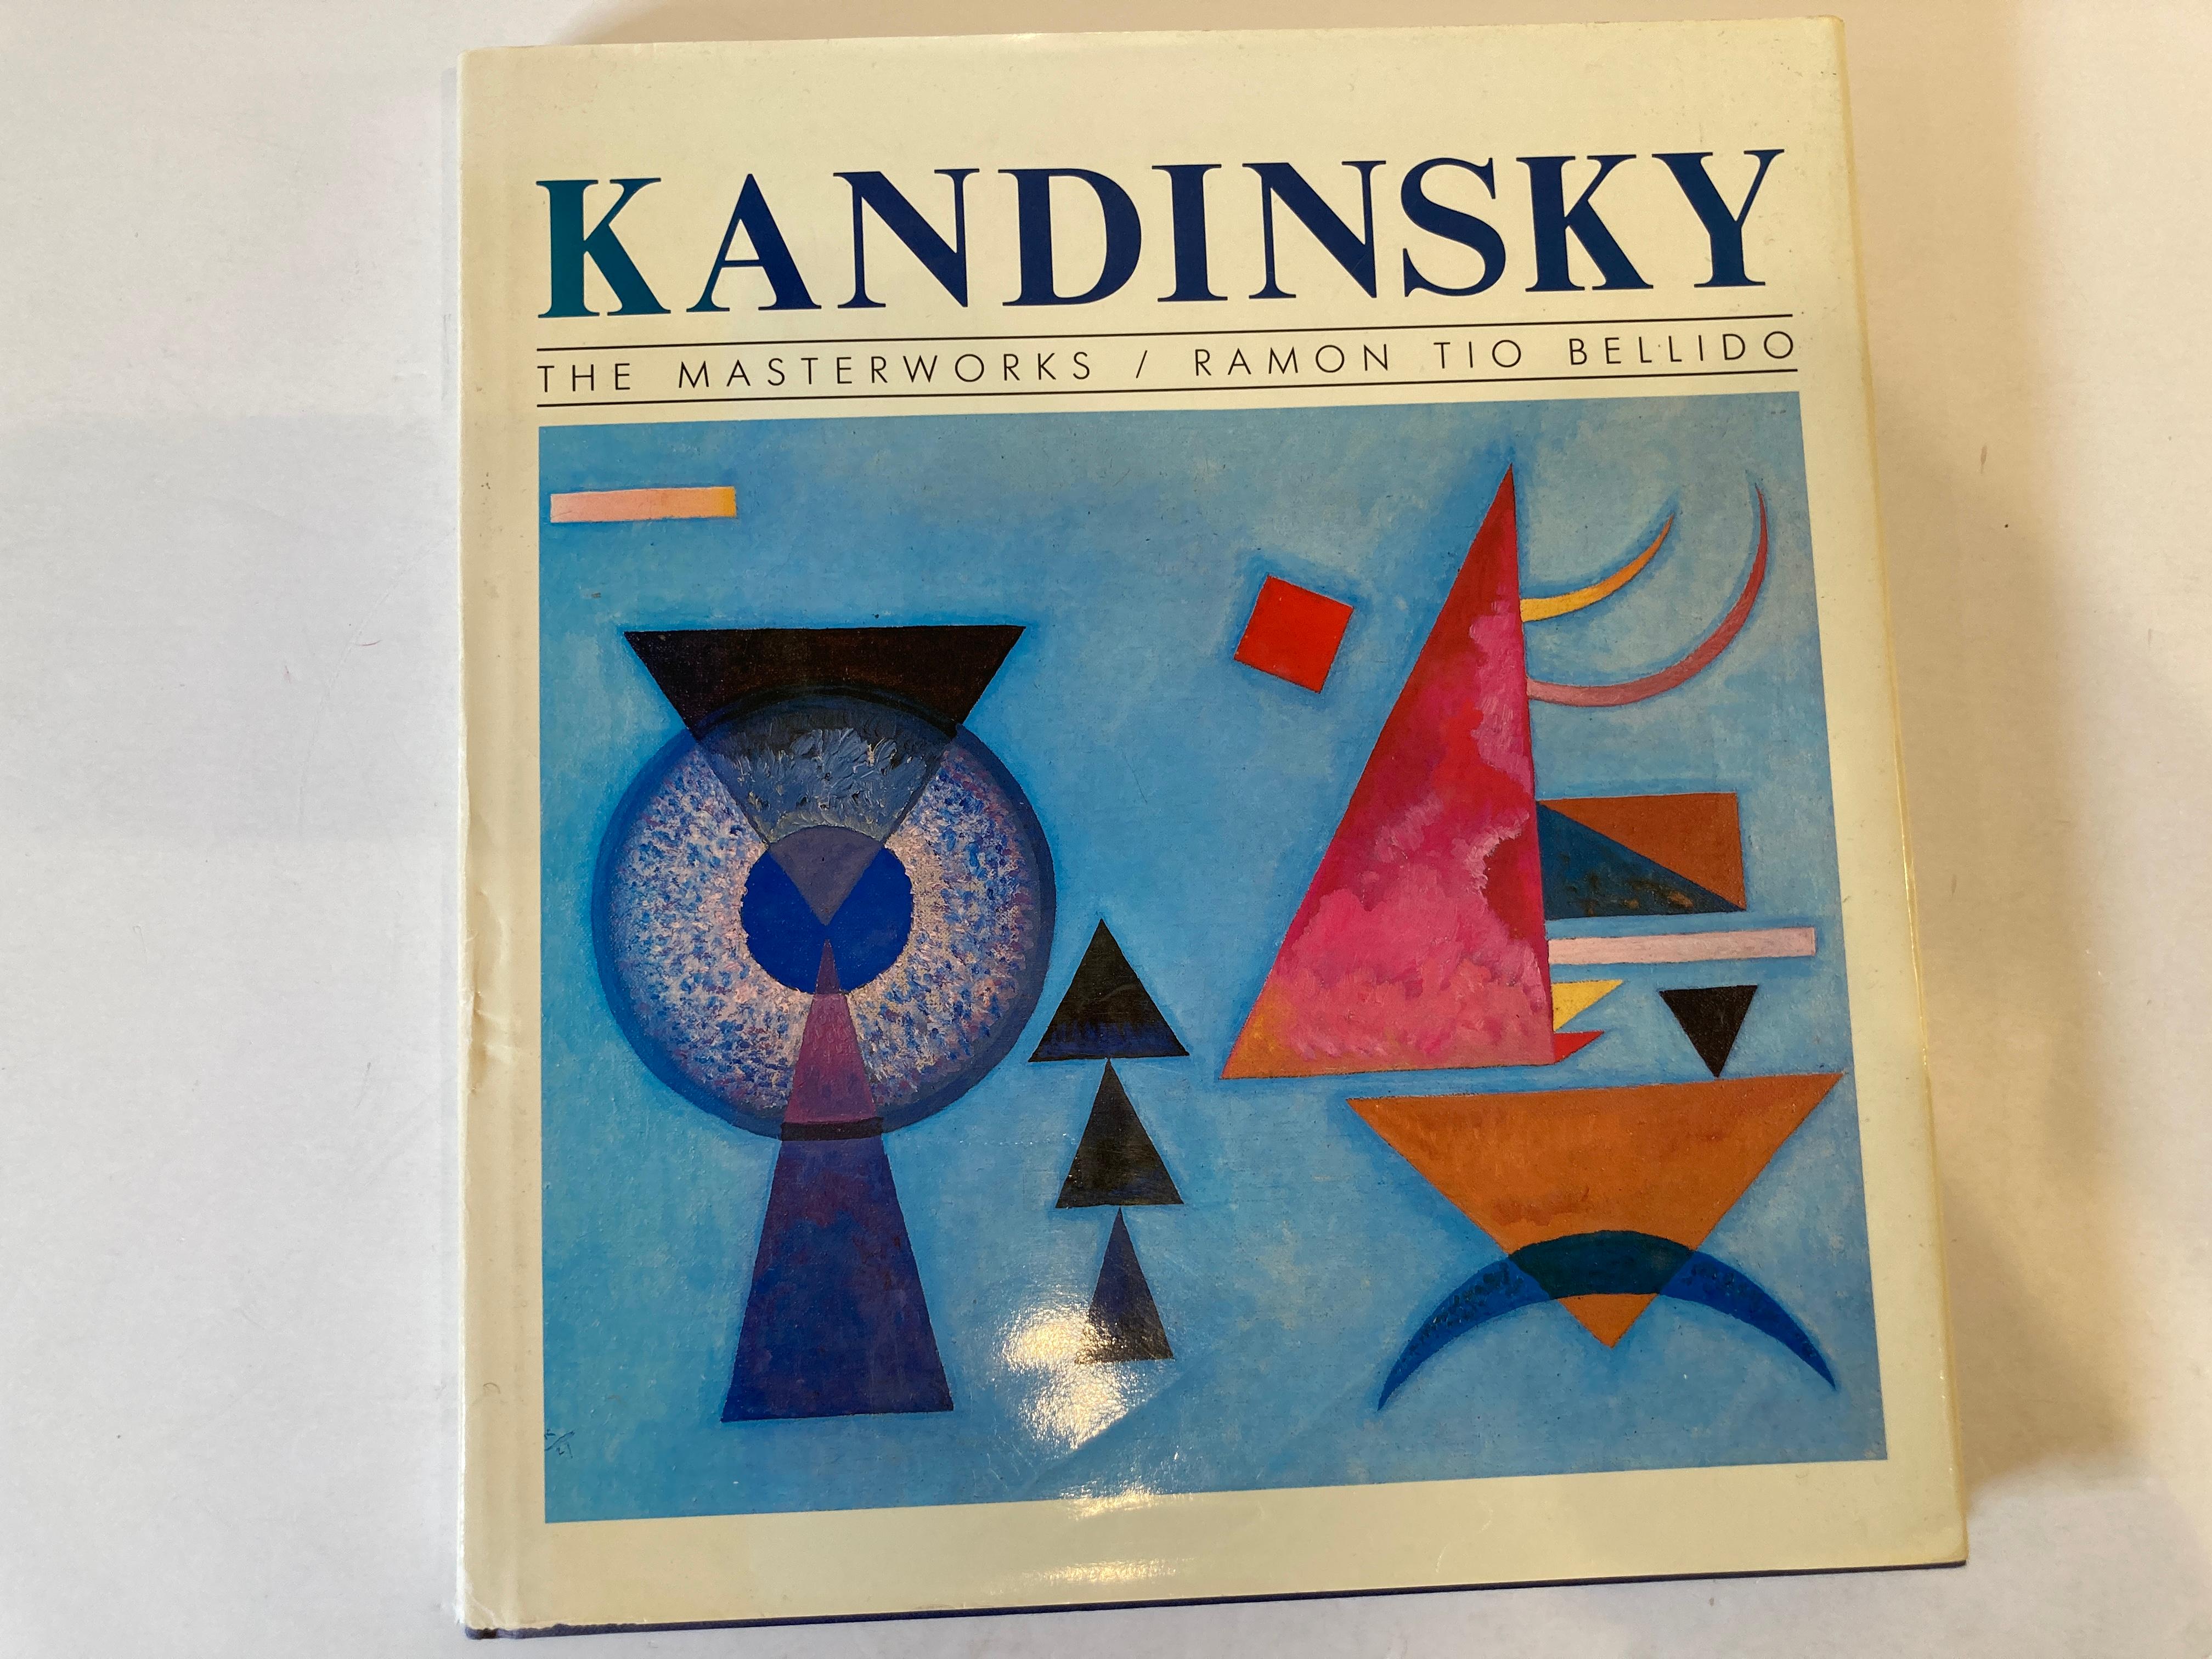 Kandinsky: Masterworks by Ramon Tio Bello Collector hardcover book
One of the first and most famous abstract painters, Wassily Kandinsky created a form in which color and shape have a life of their own. Find out how this complex Russian artist